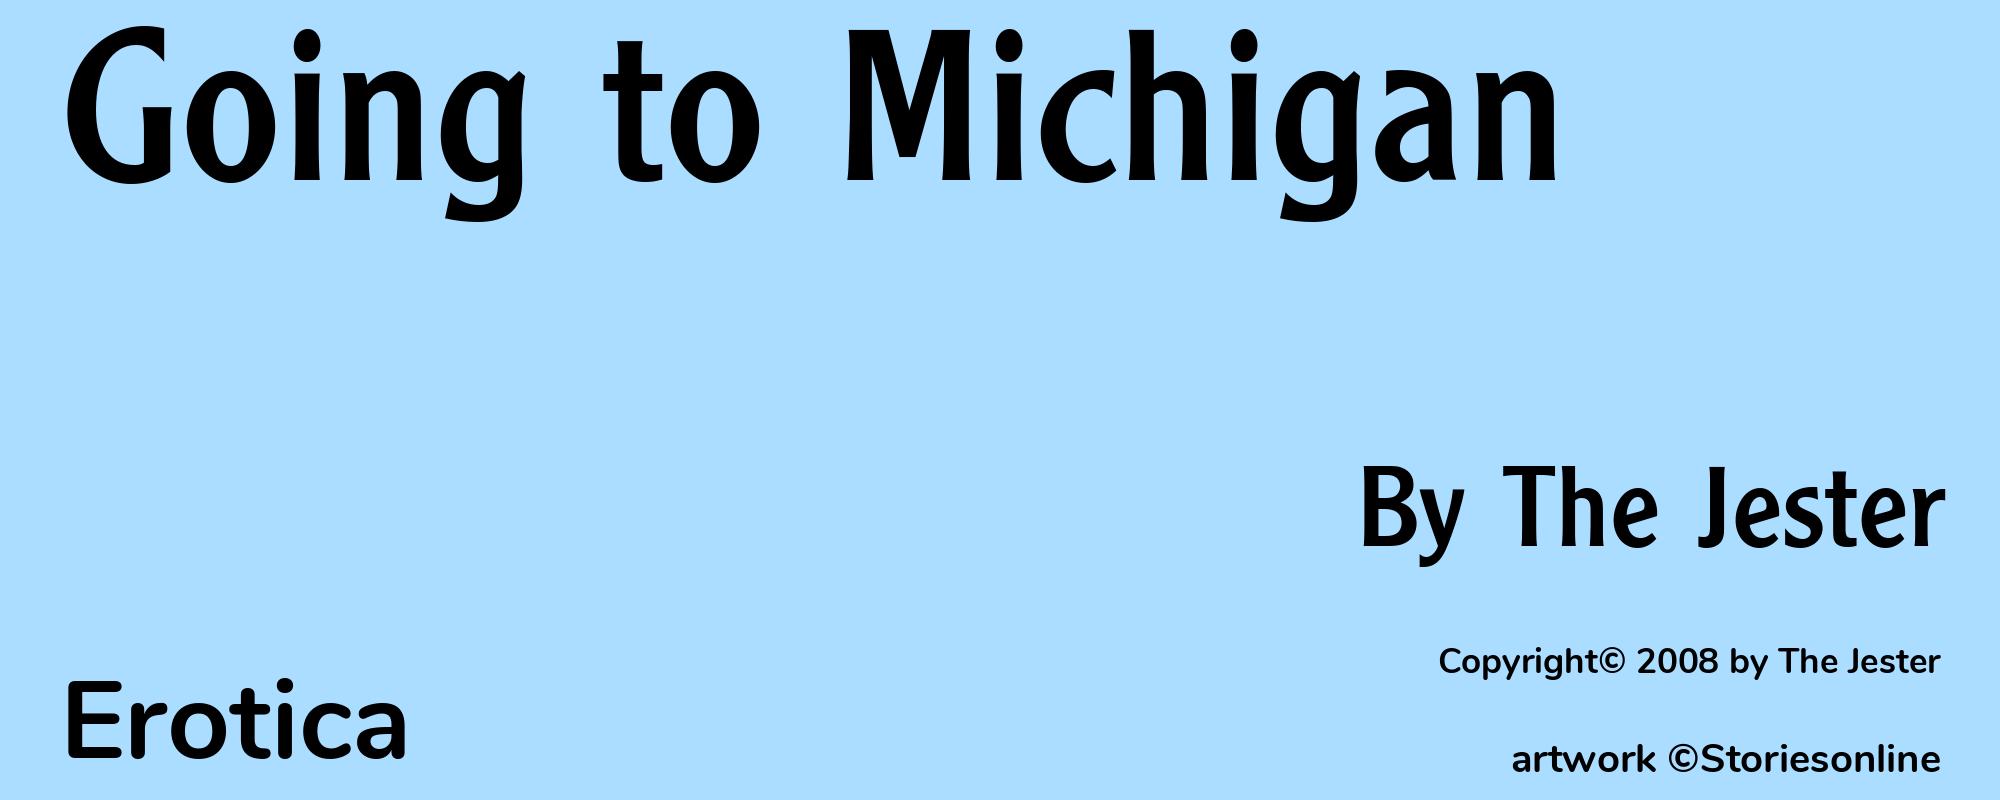 Going to Michigan - Cover